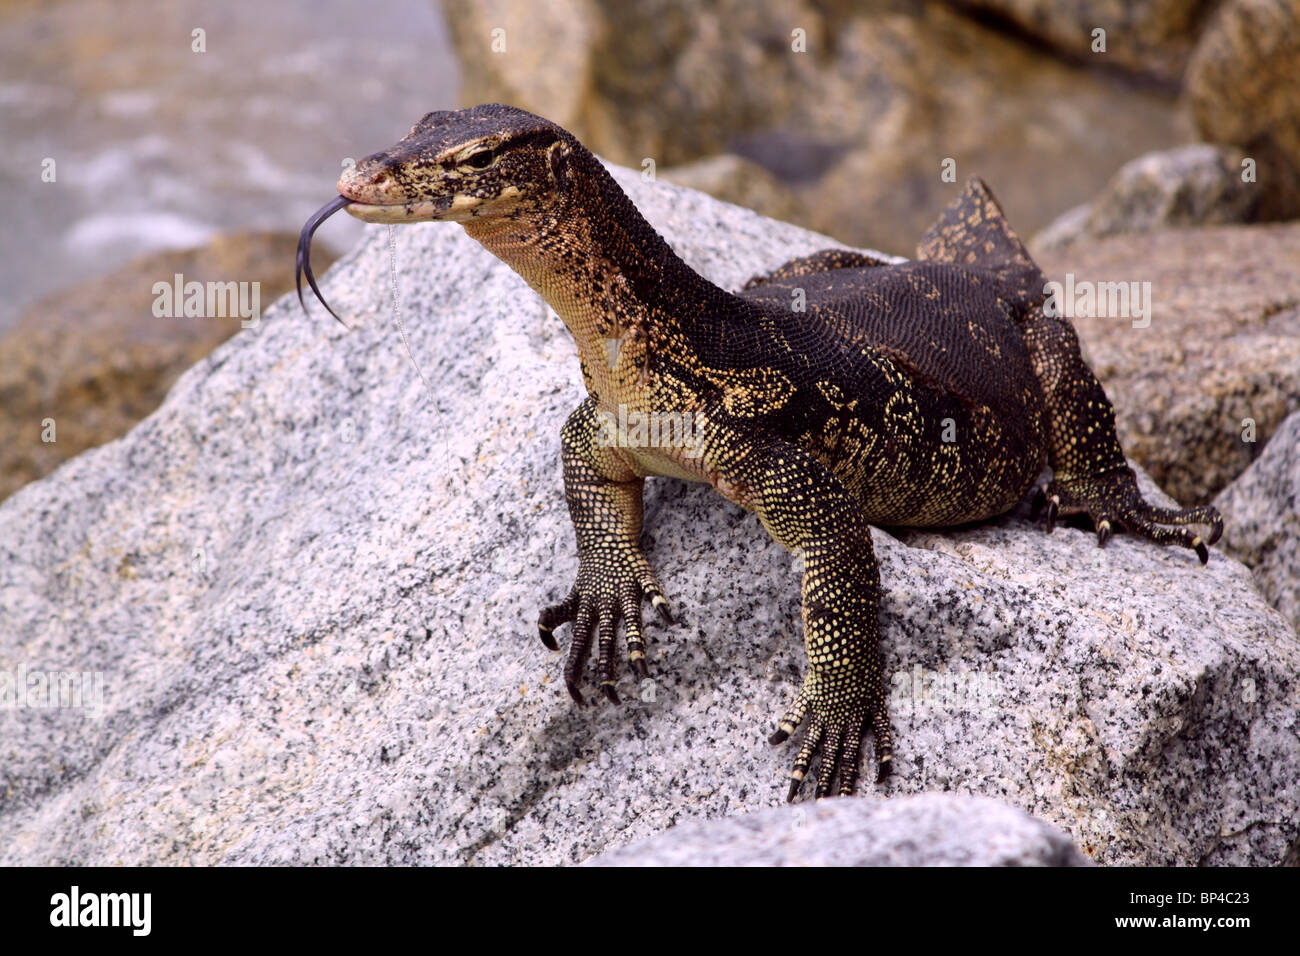 Large Asian Monitor Lizard on rocks with tongue out Stock Photo